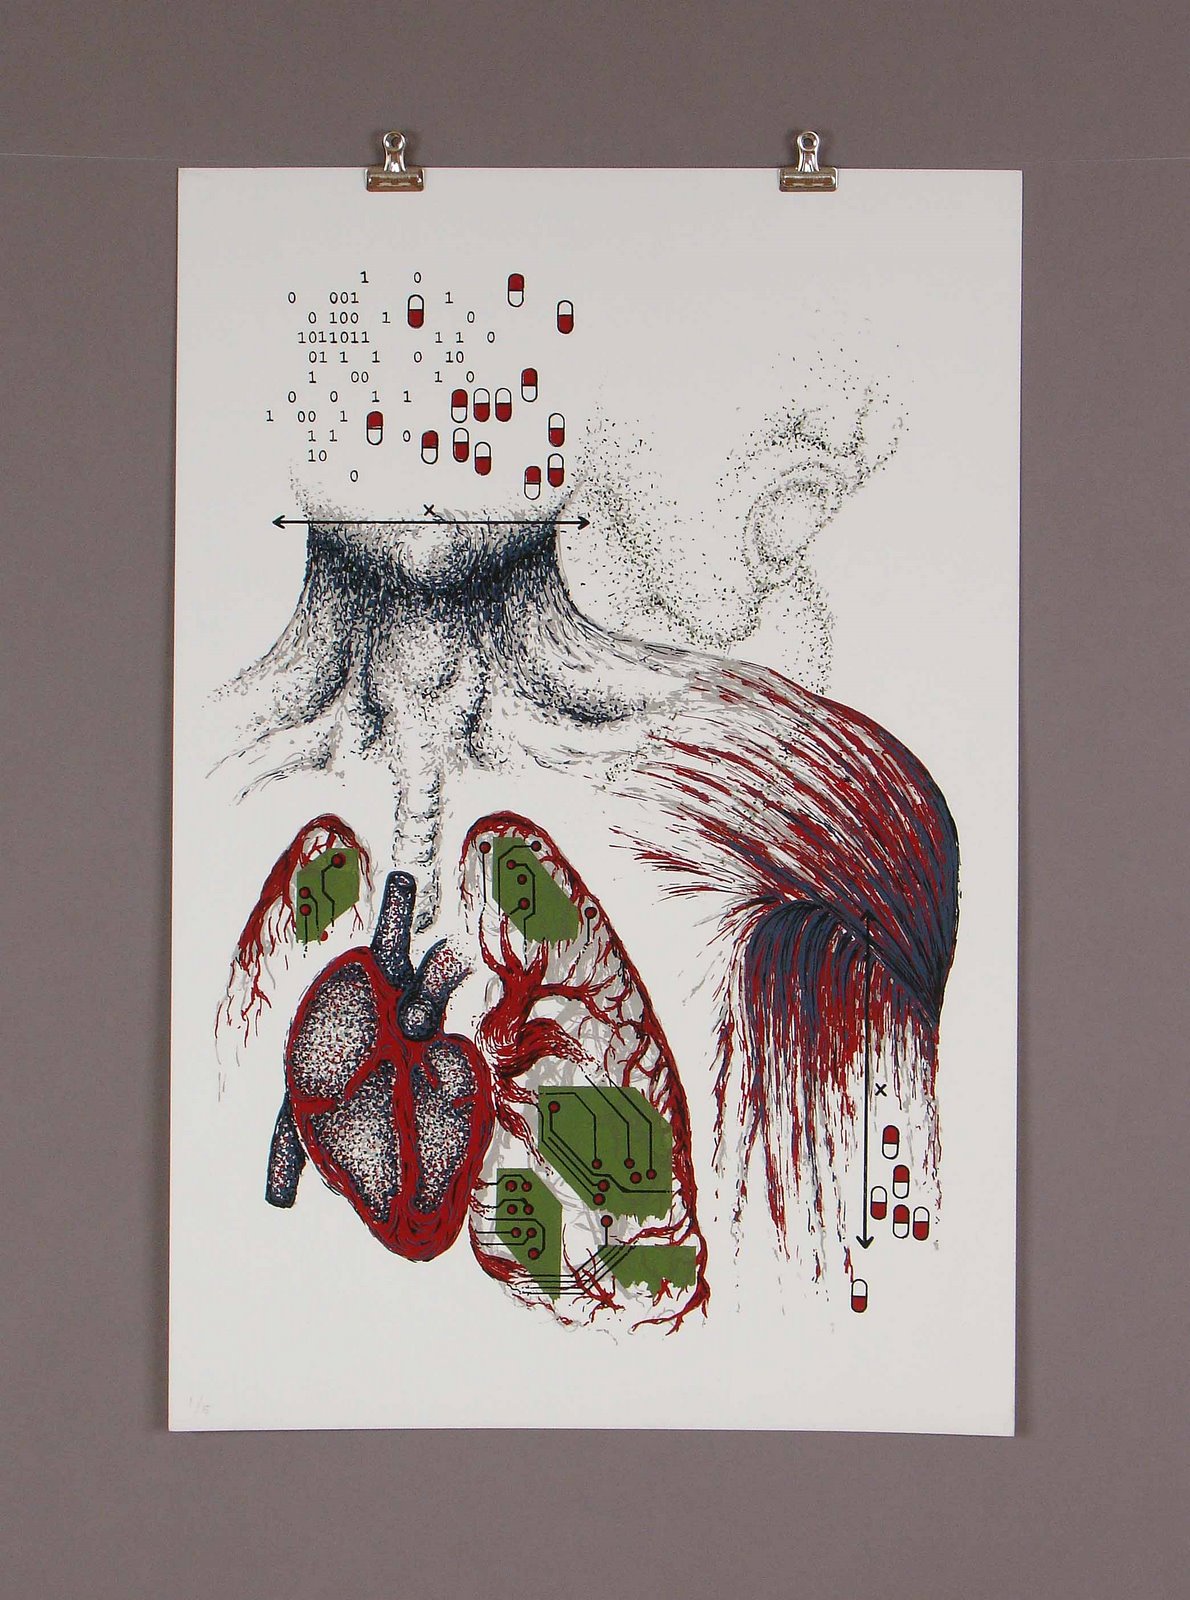 [Brian+M.+Besch+-+Untitled+(lungs,+heart,+with+pills+and+circuit+board).jpg]